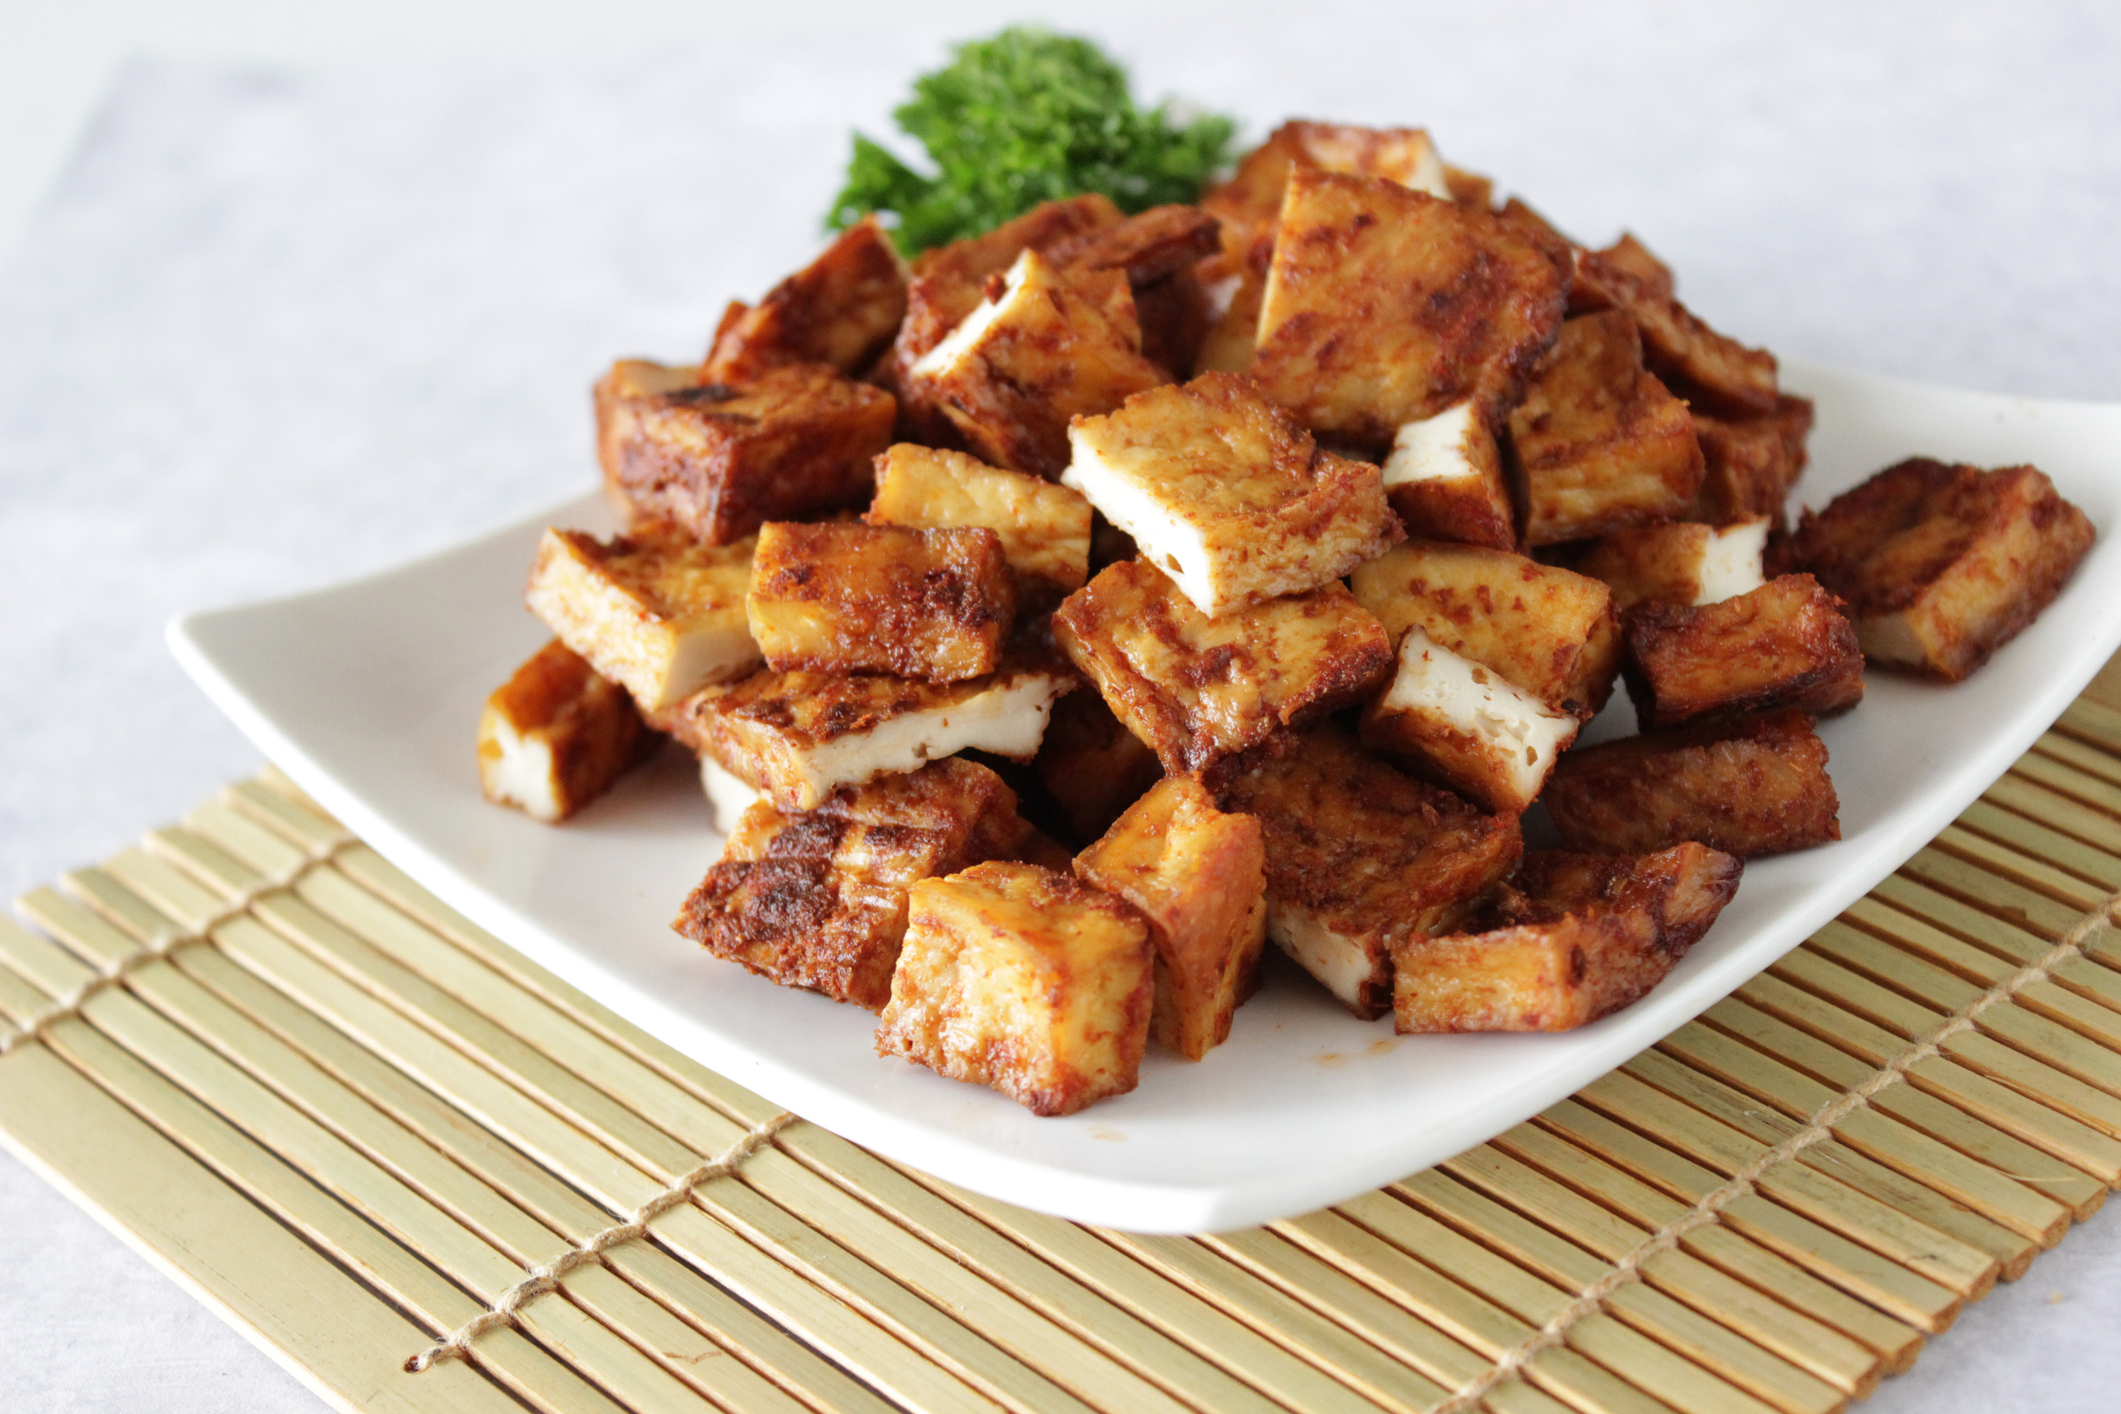 Plate of Baked Tofu | Types of Tofu